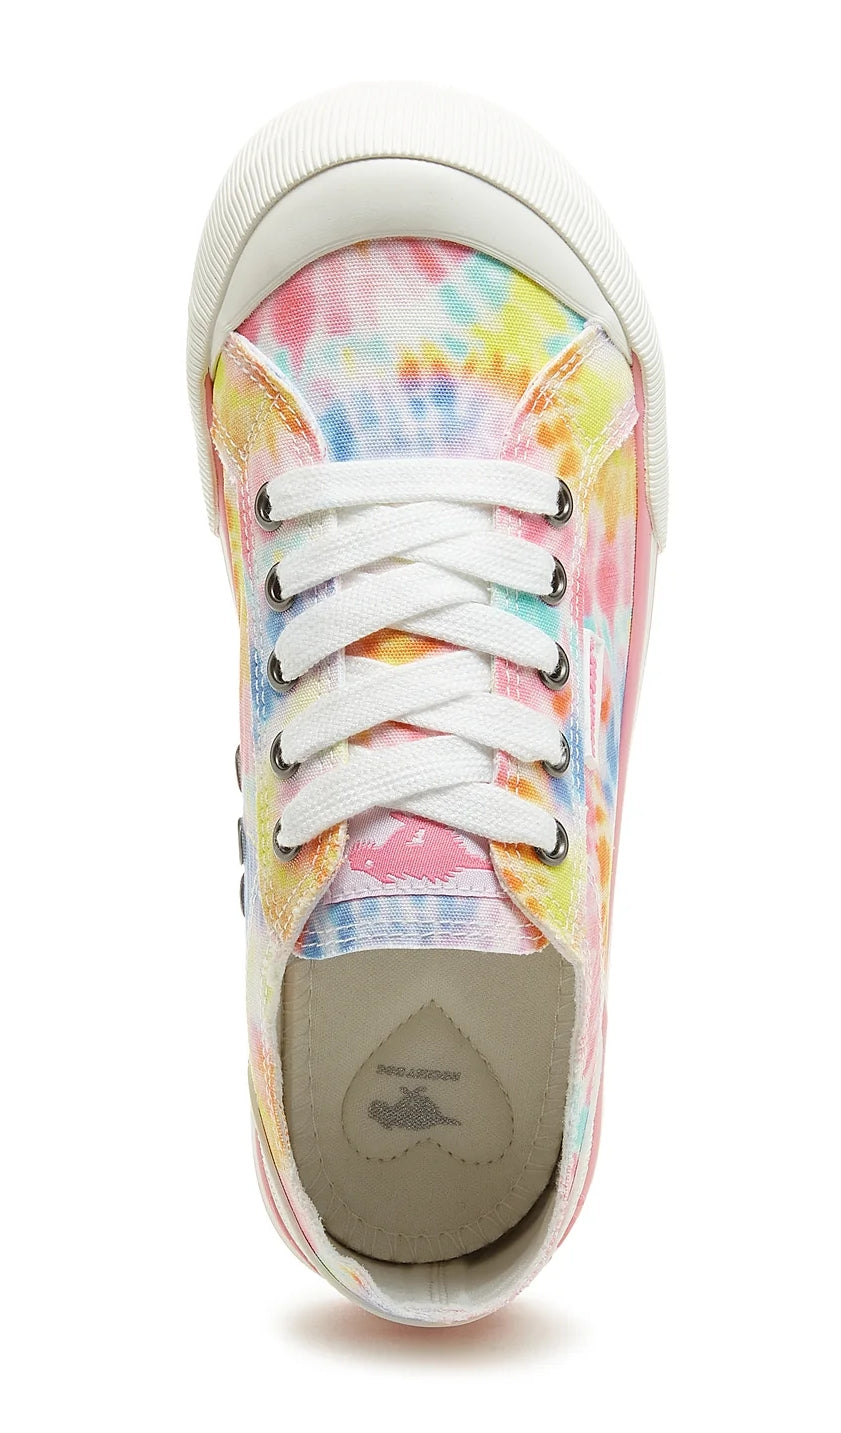 Lace up women's Jazzin cotton trainers with a multicoloured pastel tie dye pattern and white laces.